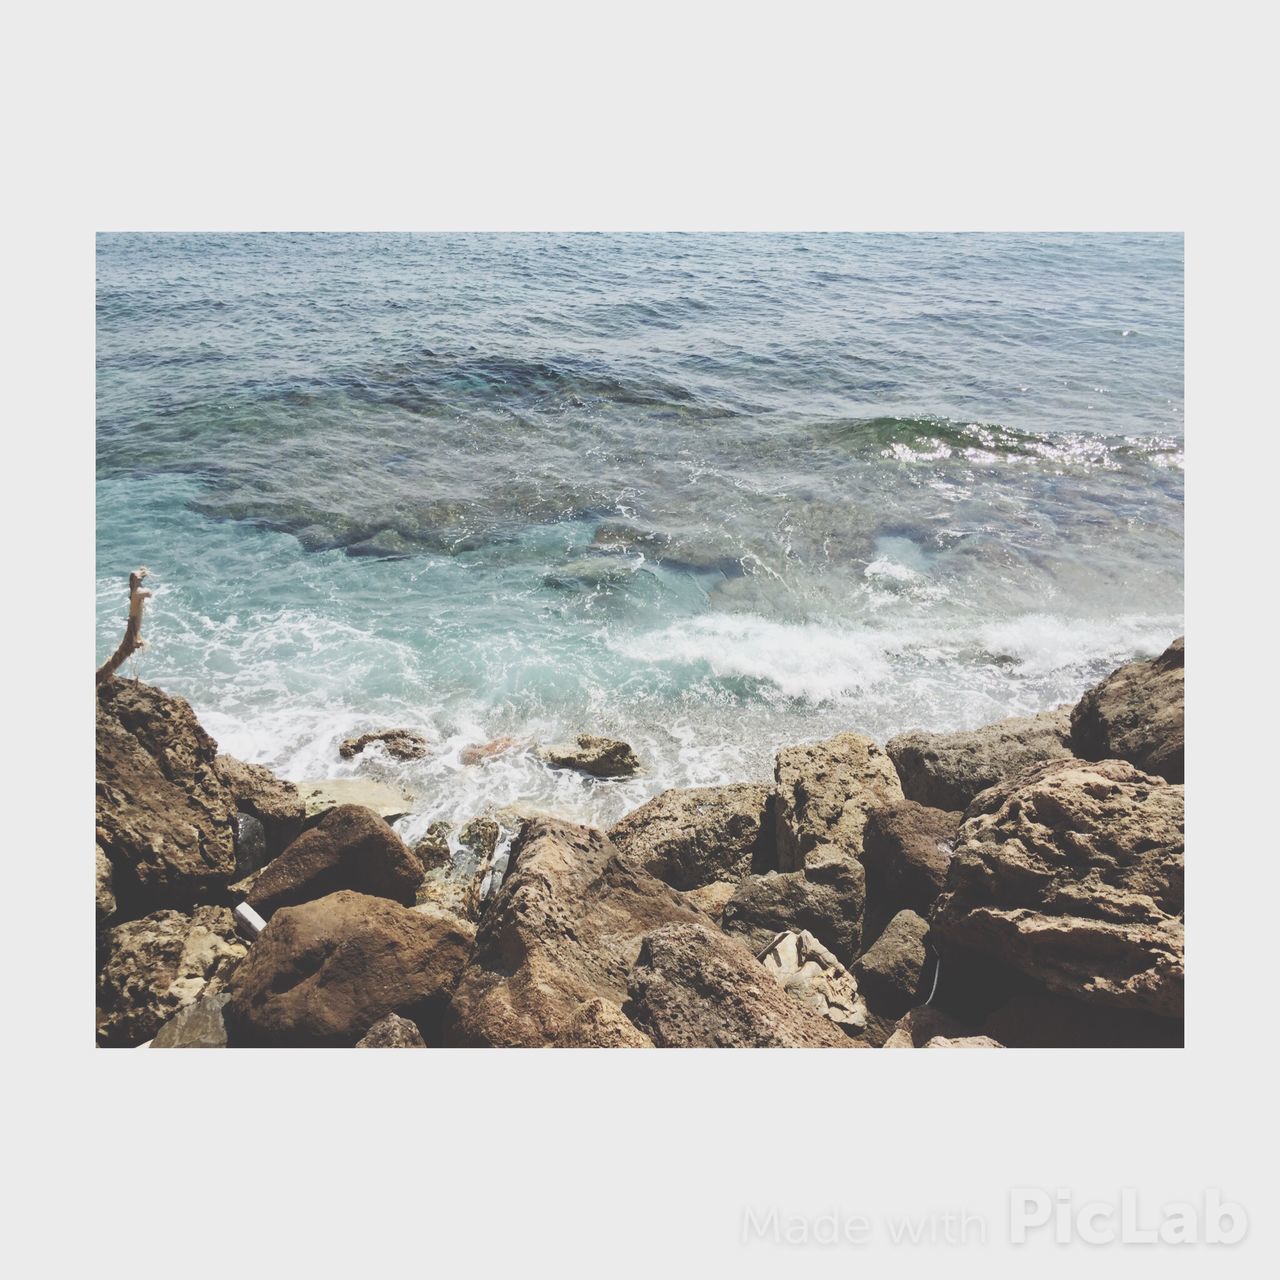 sea, water, horizon over water, transfer print, scenics, beauty in nature, auto post production filter, tranquility, tranquil scene, nature, wave, rock - object, beach, shore, surf, idyllic, clear sky, seascape, rock, rock formation